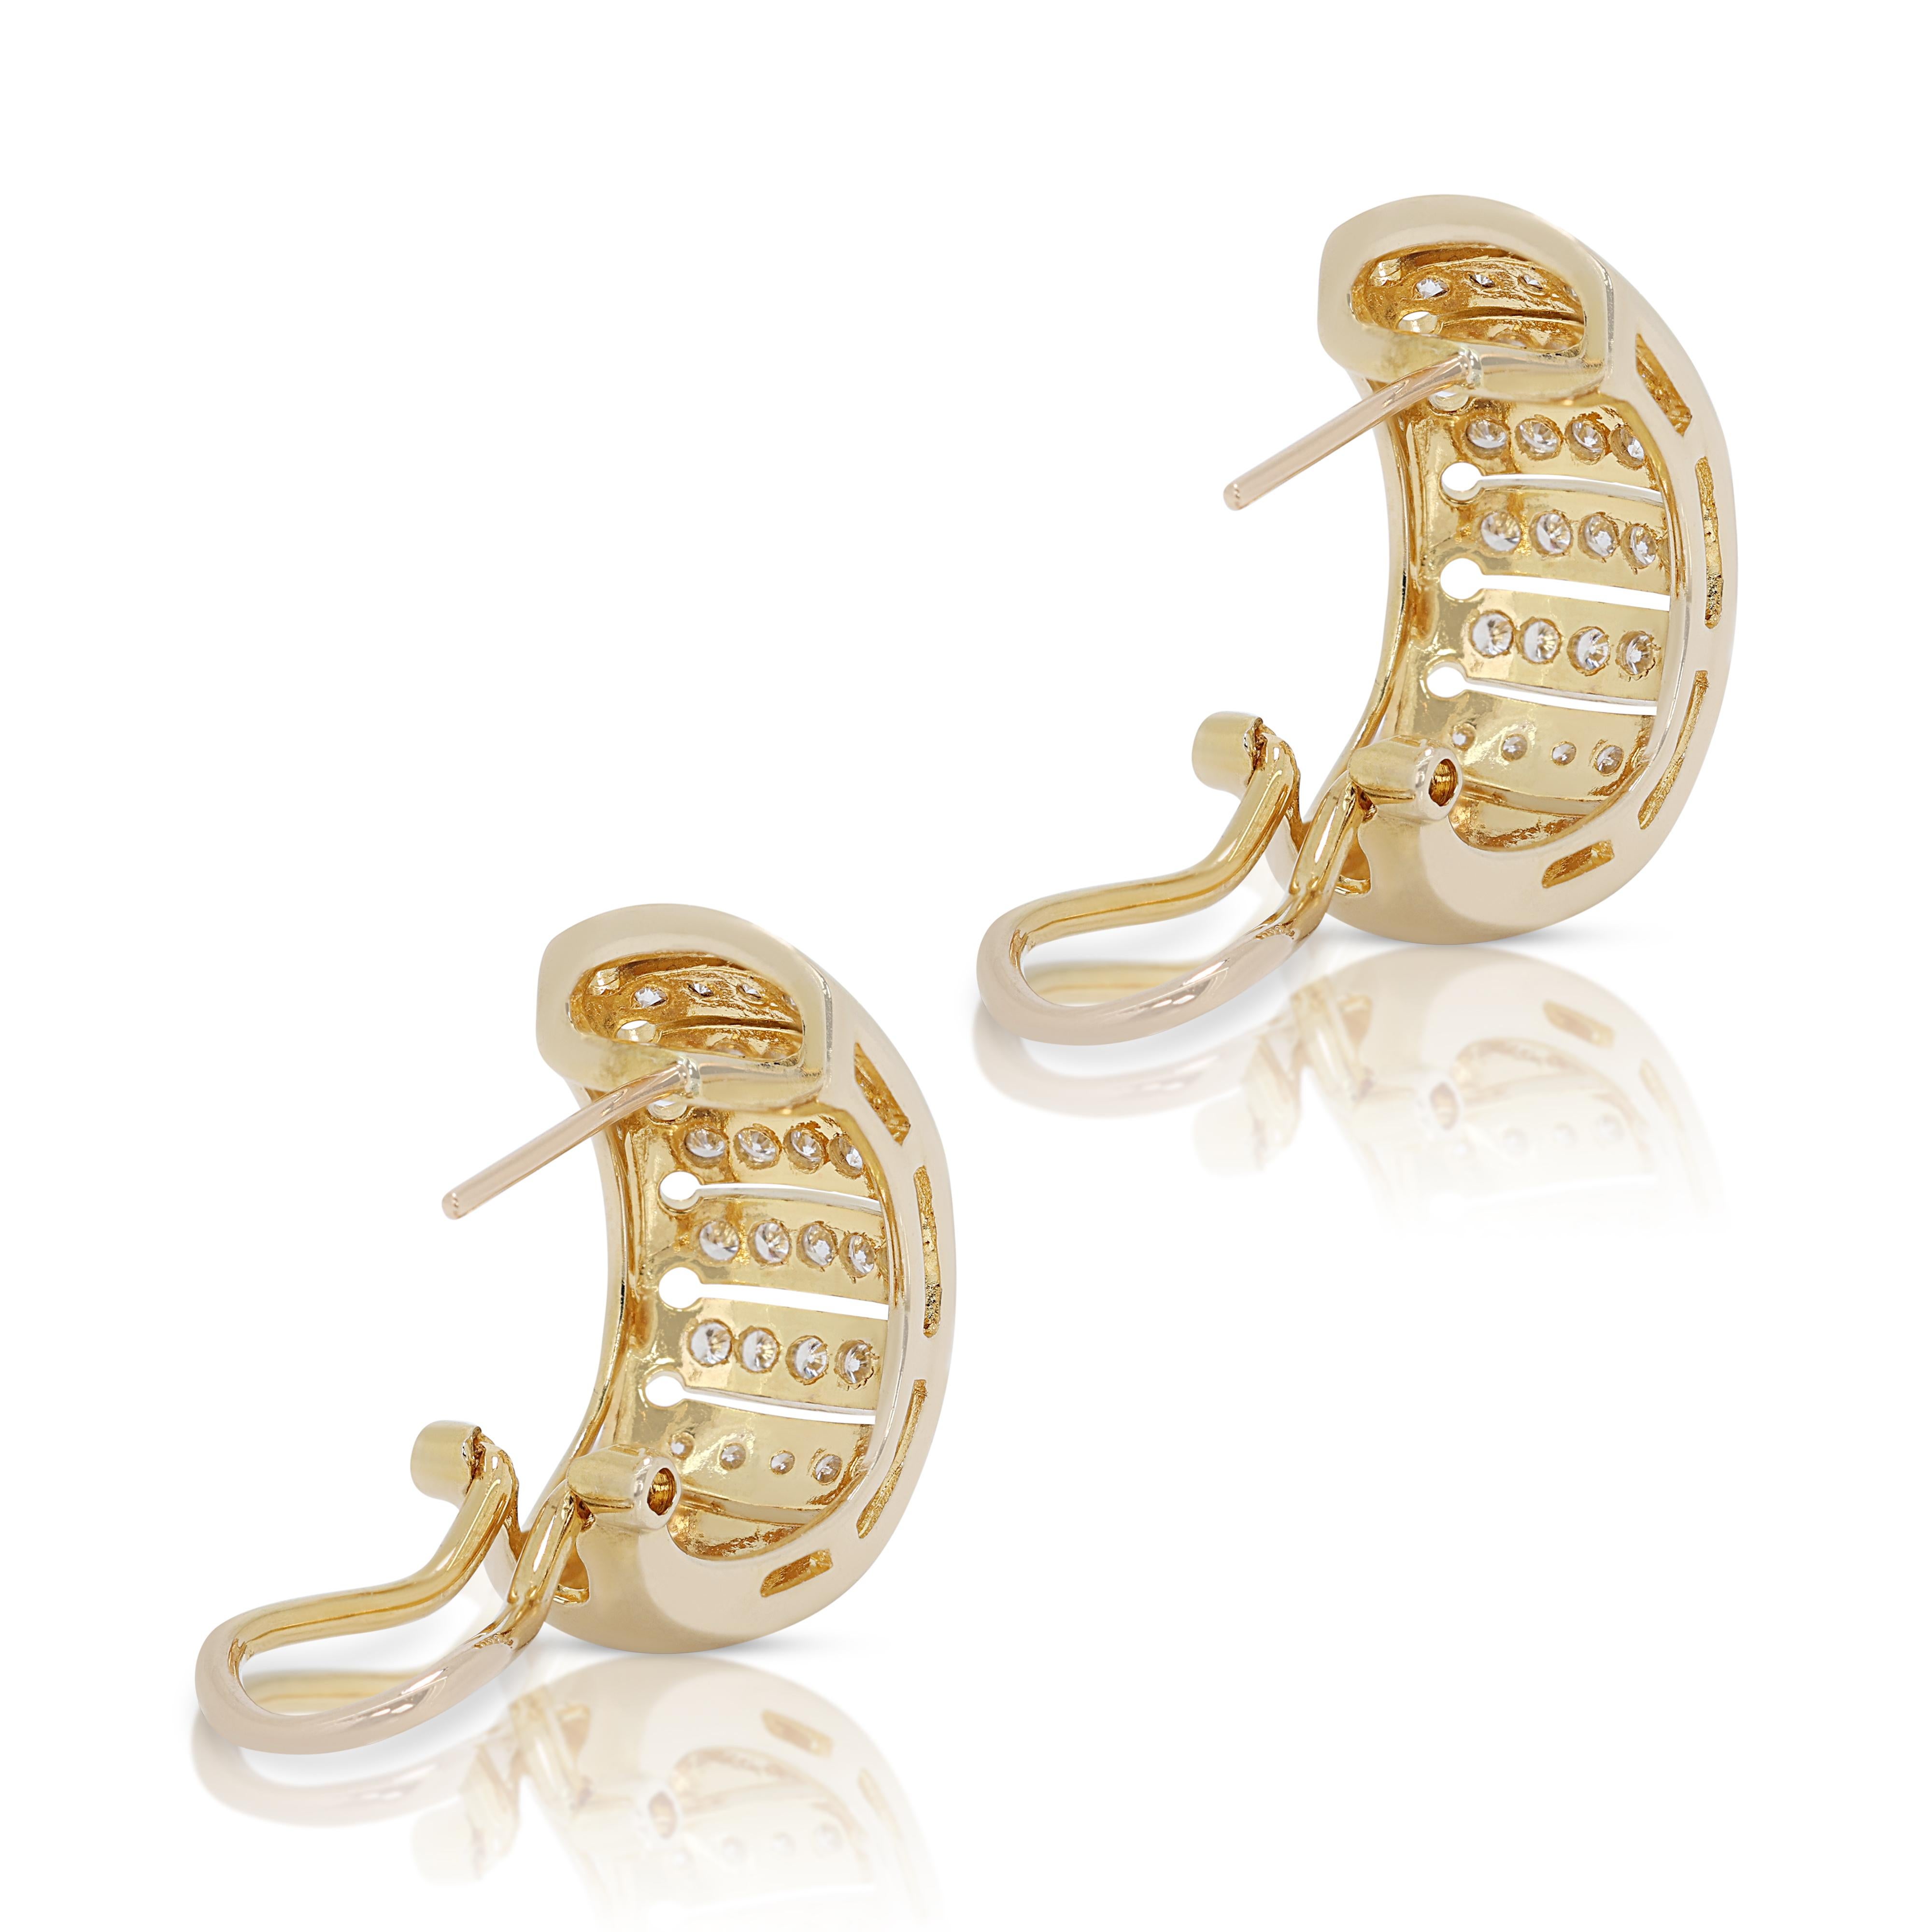 Timeless 0.42ct Diamond Earrings in 18k Yellow Gold For Sale 2